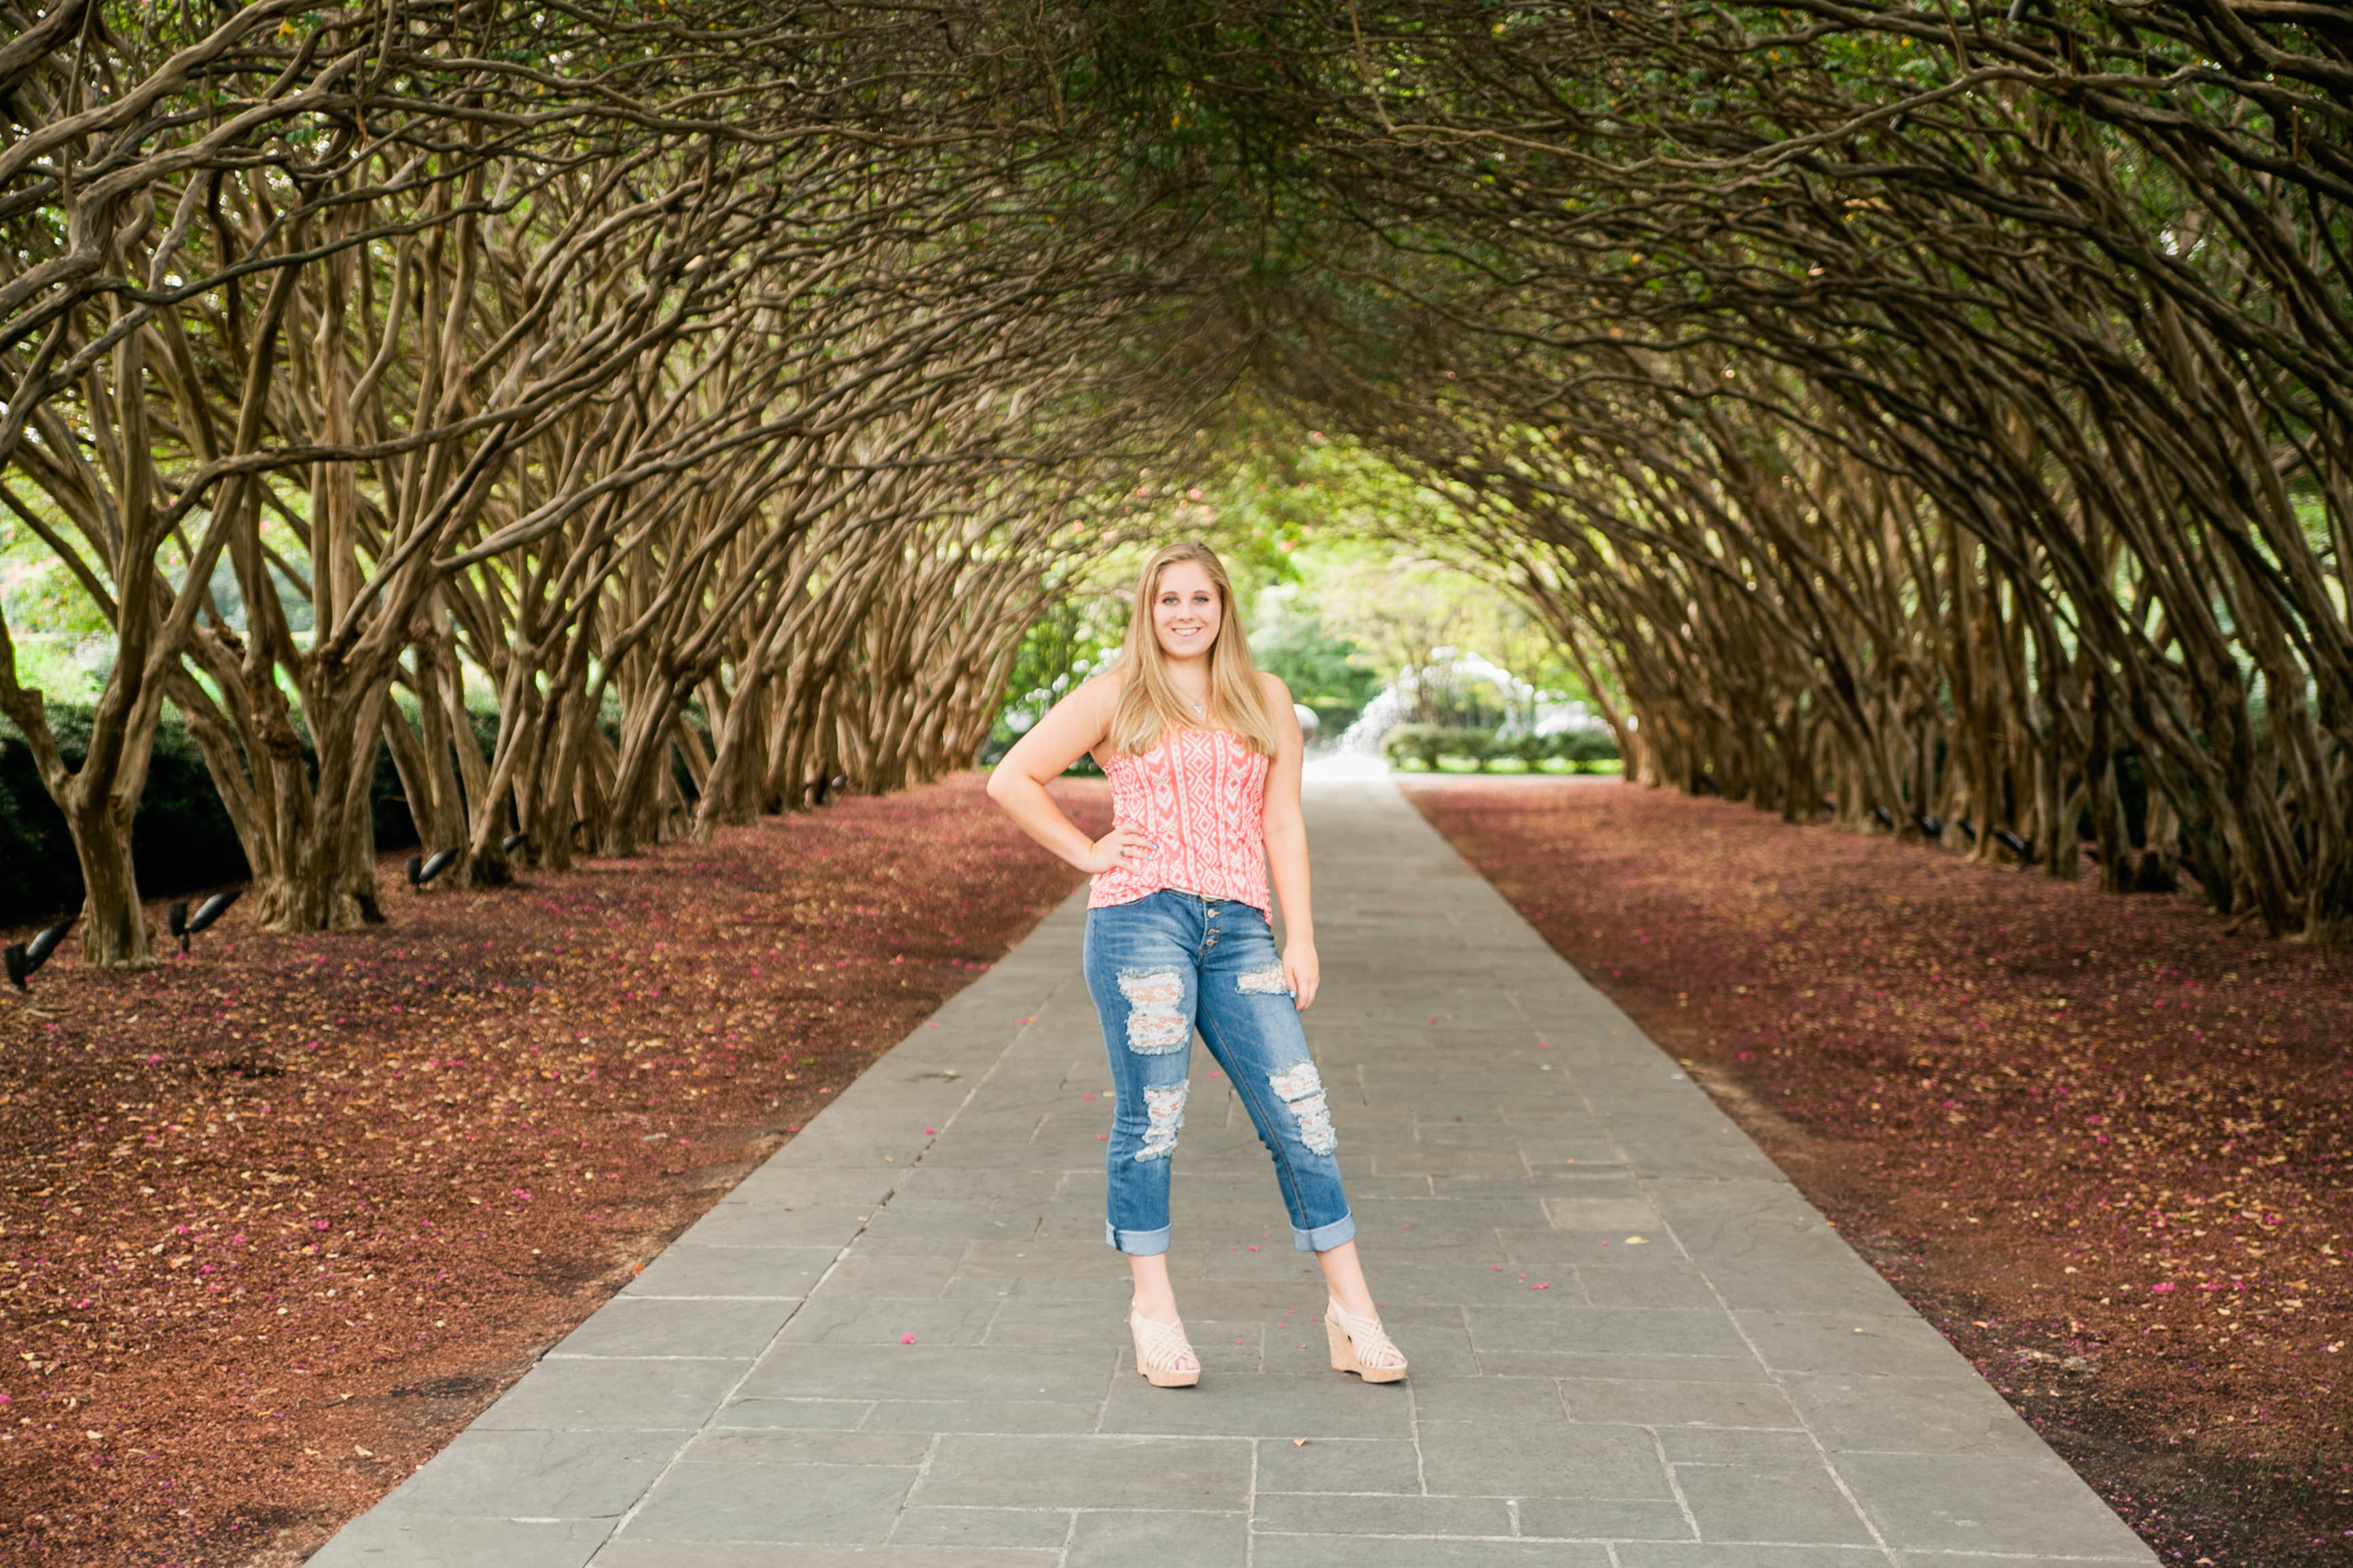 Senior portraits photographed at the Dallas Arboretum by photographer Amber Knauss of Golightly Images